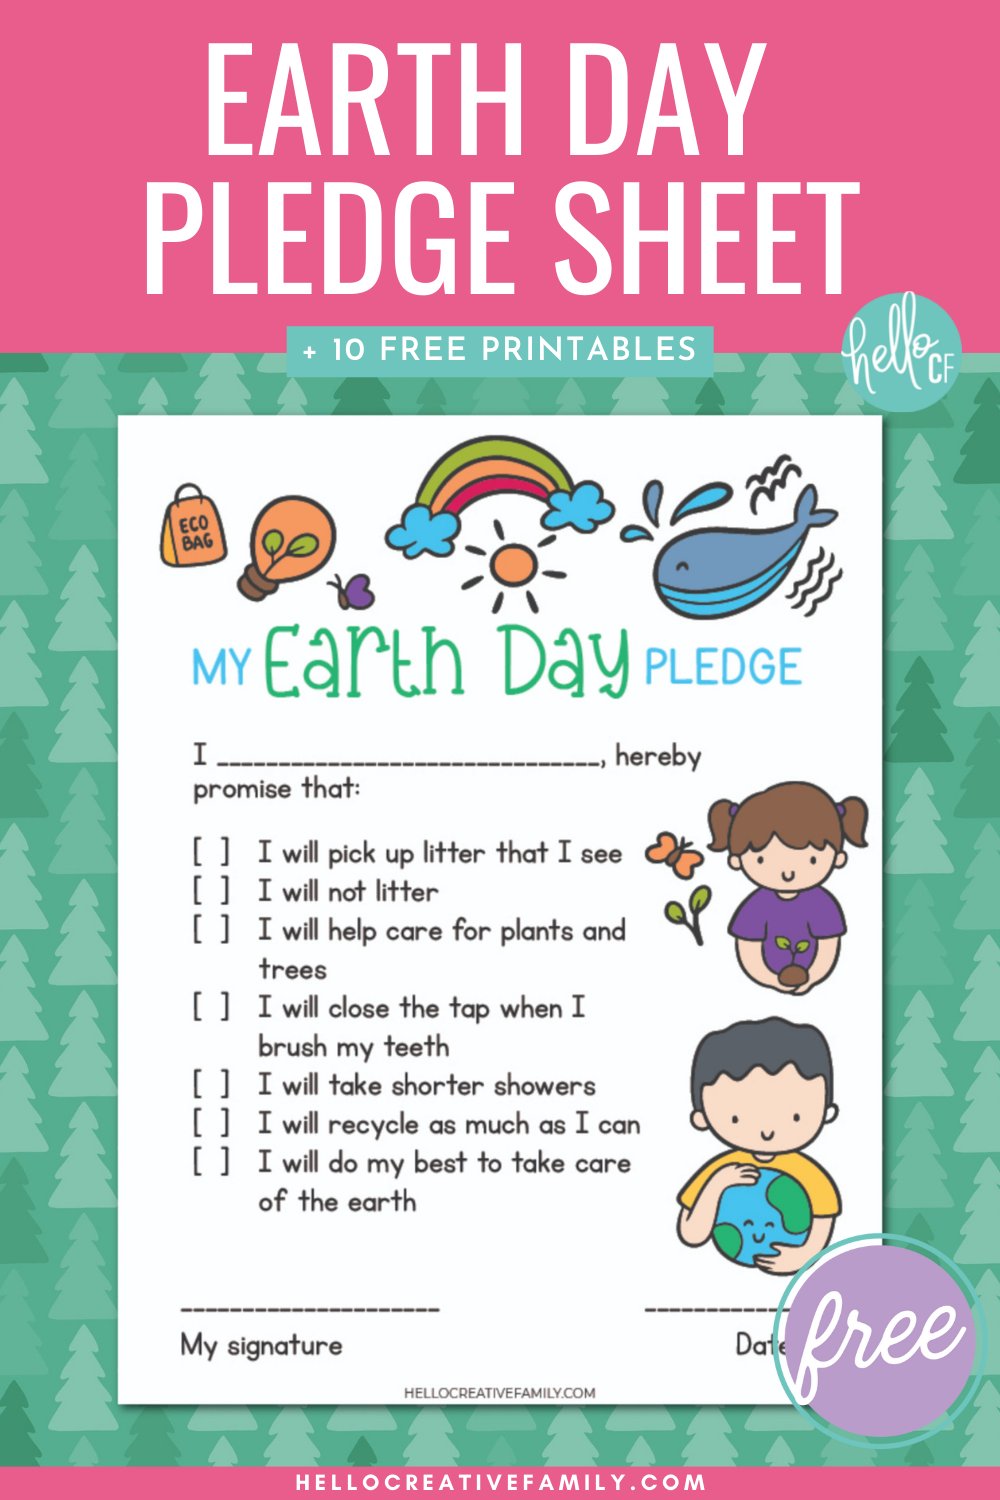 Earth Day is on April 22 and we have 10 free Earth Day printables to help you celebrate. There's a scavenger hunt, word search, maze and even an Earth Day pledge. Great for learning about Earth Day in school, homeschooling or just for fun at home!